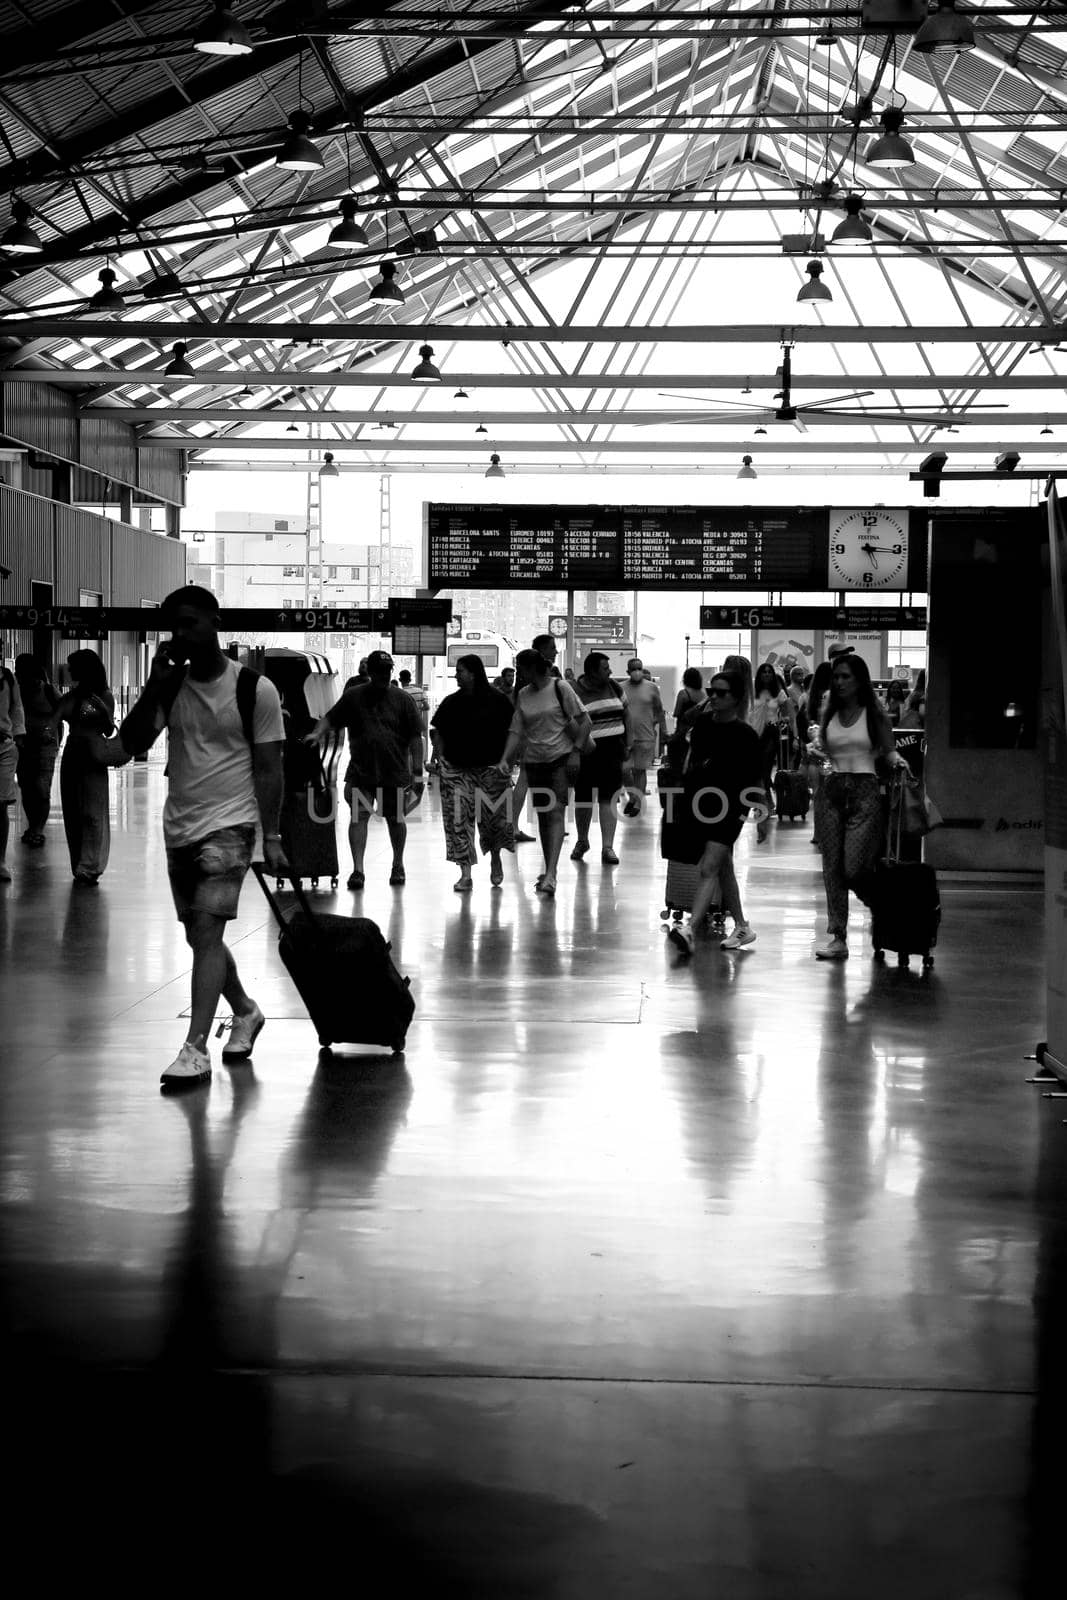 Passengers walking through the train station of Alicante by soniabonet